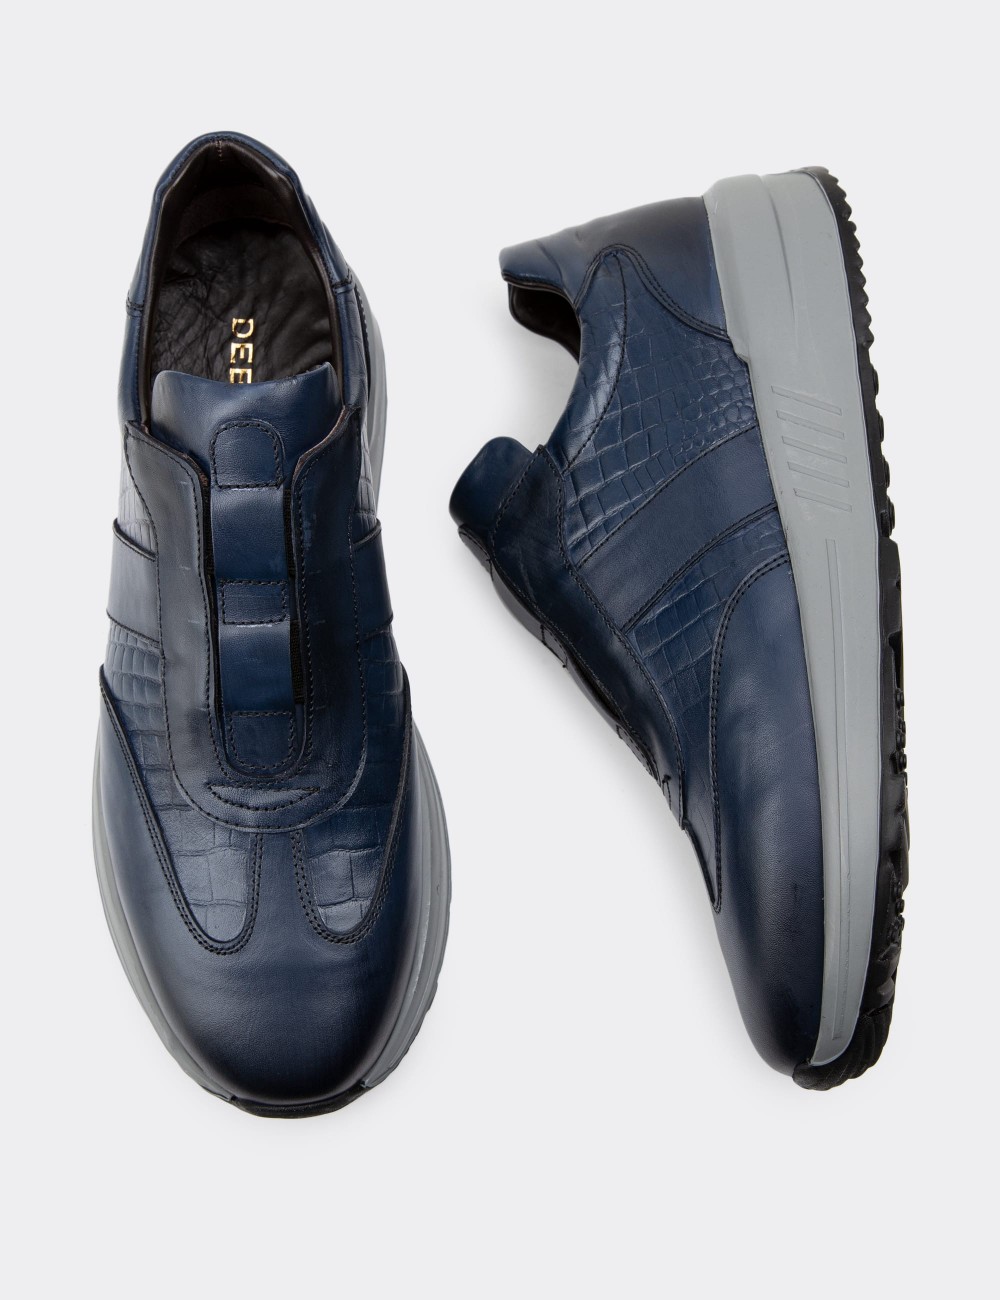 Navy Leather Sneakers - 01891MLCVE01